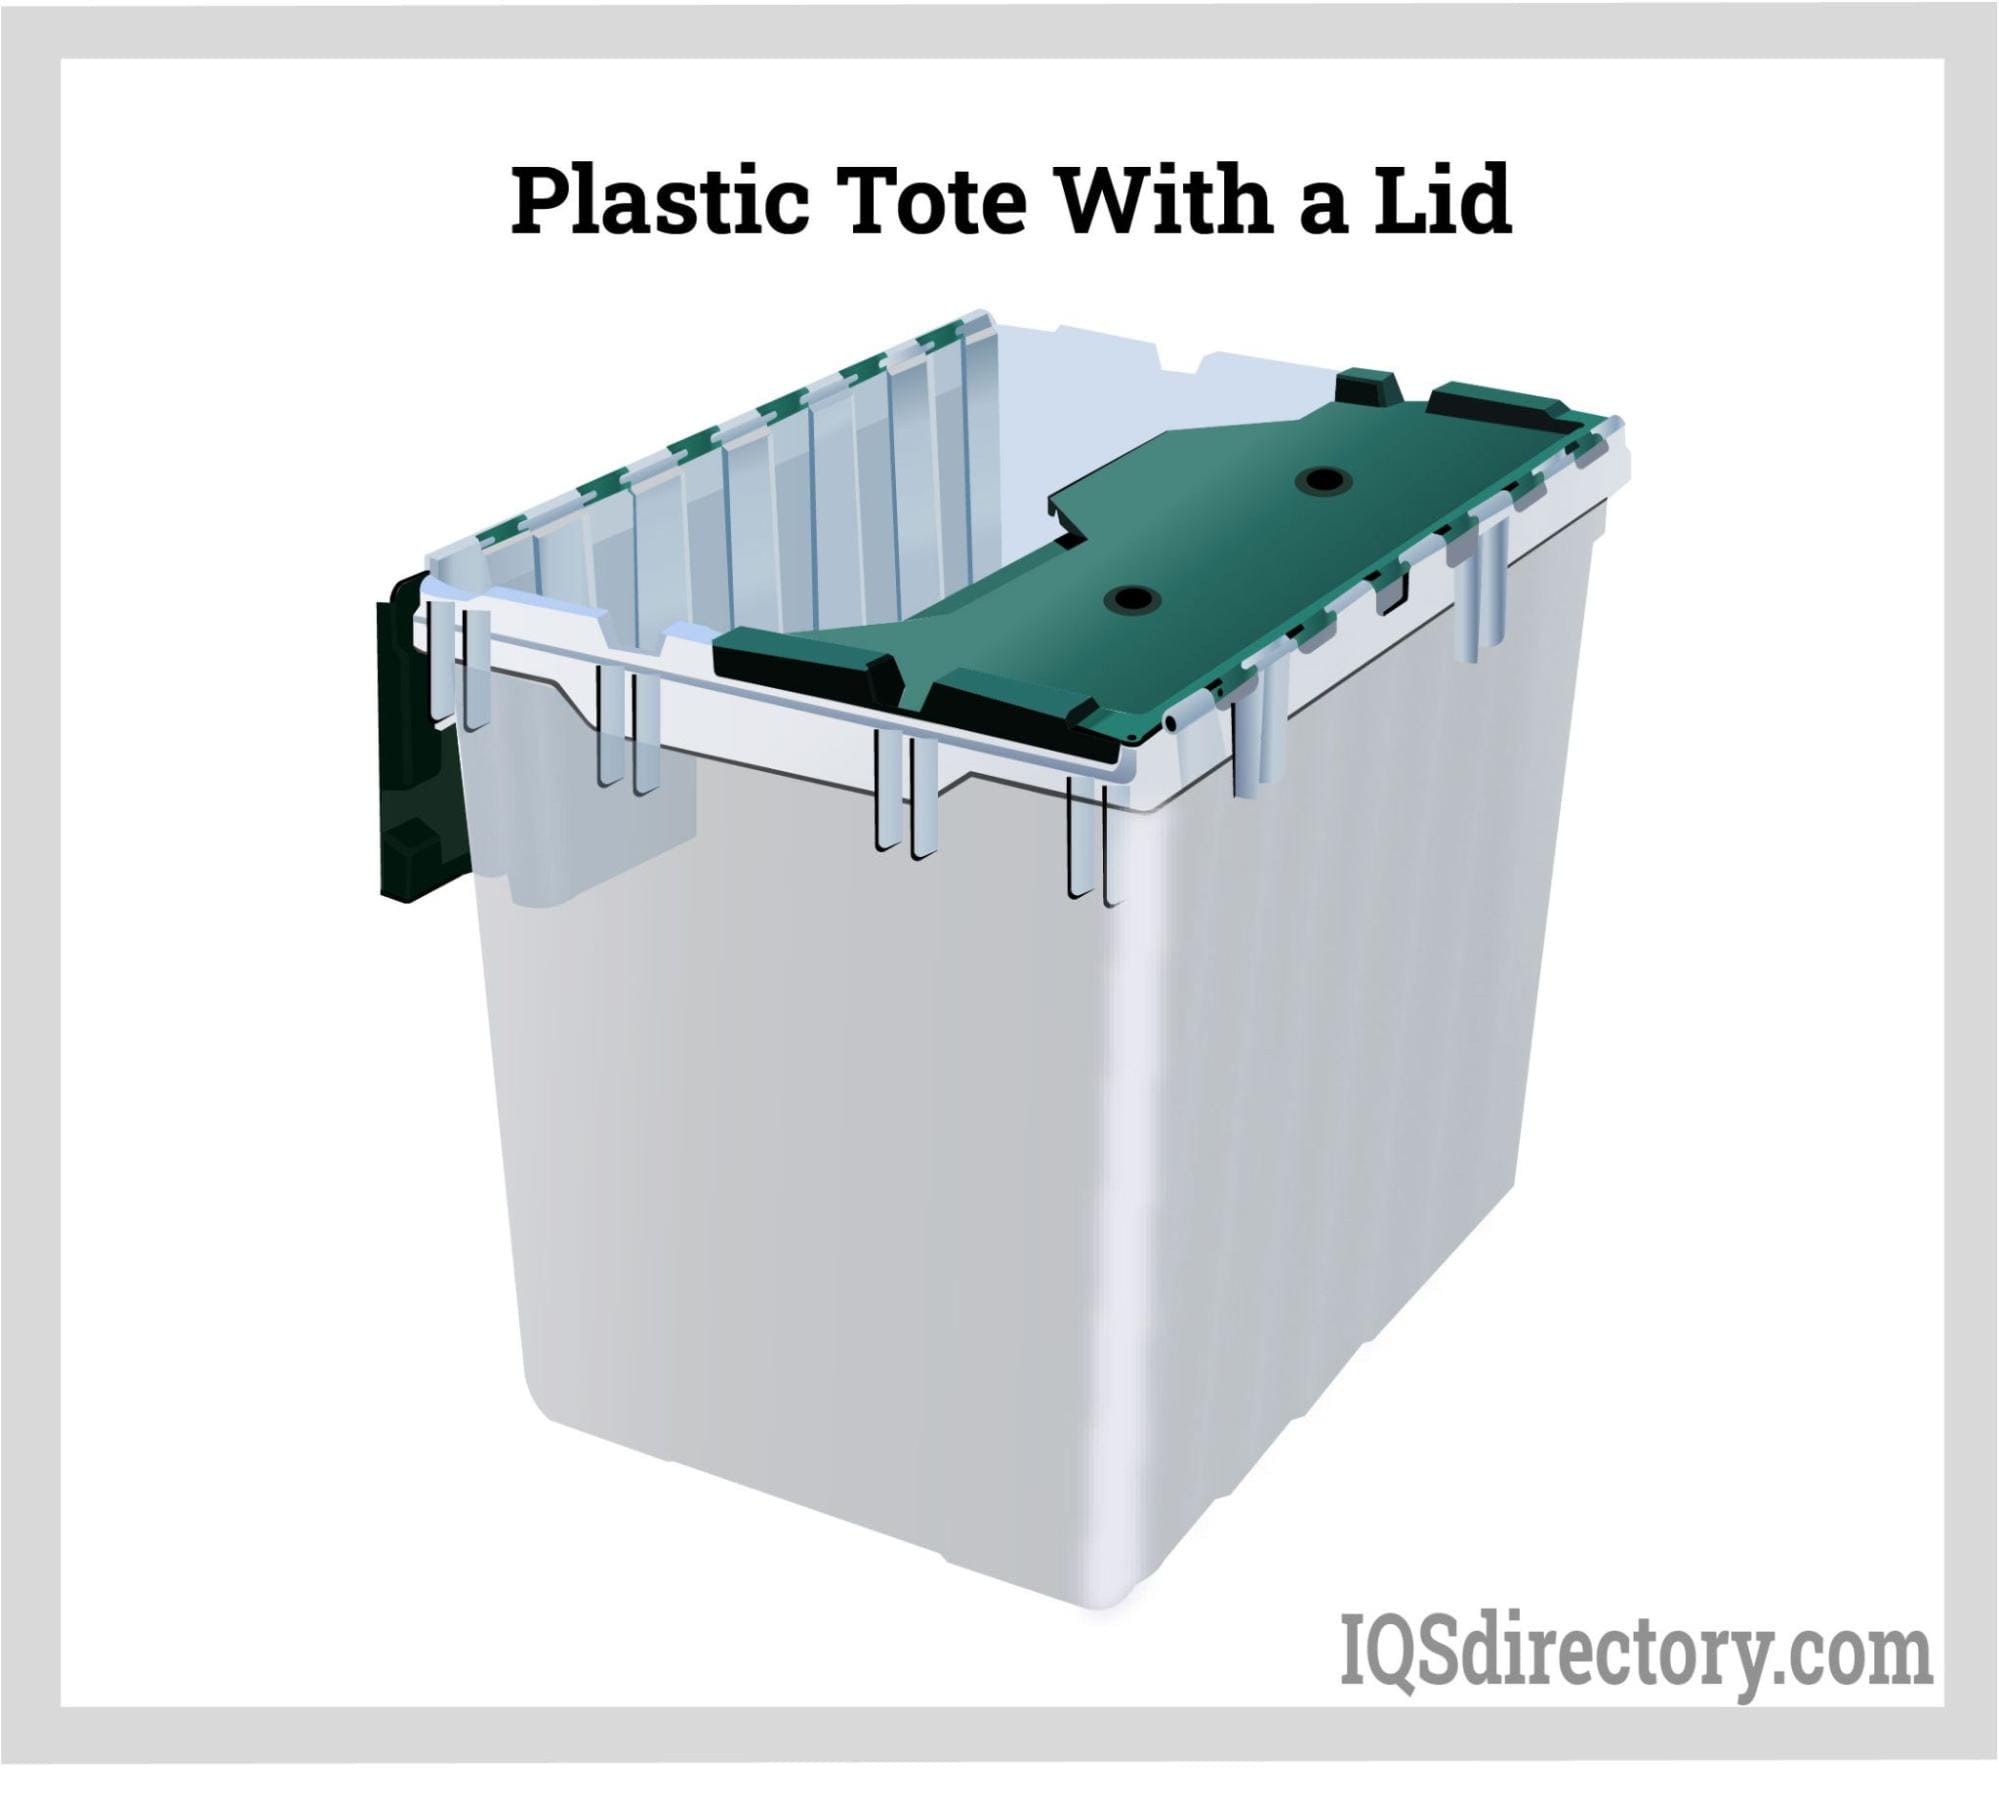 https://www.plastic-containers.net/wp-content/uploads/2023/02/plastic-tote-with-a-lid.jpg